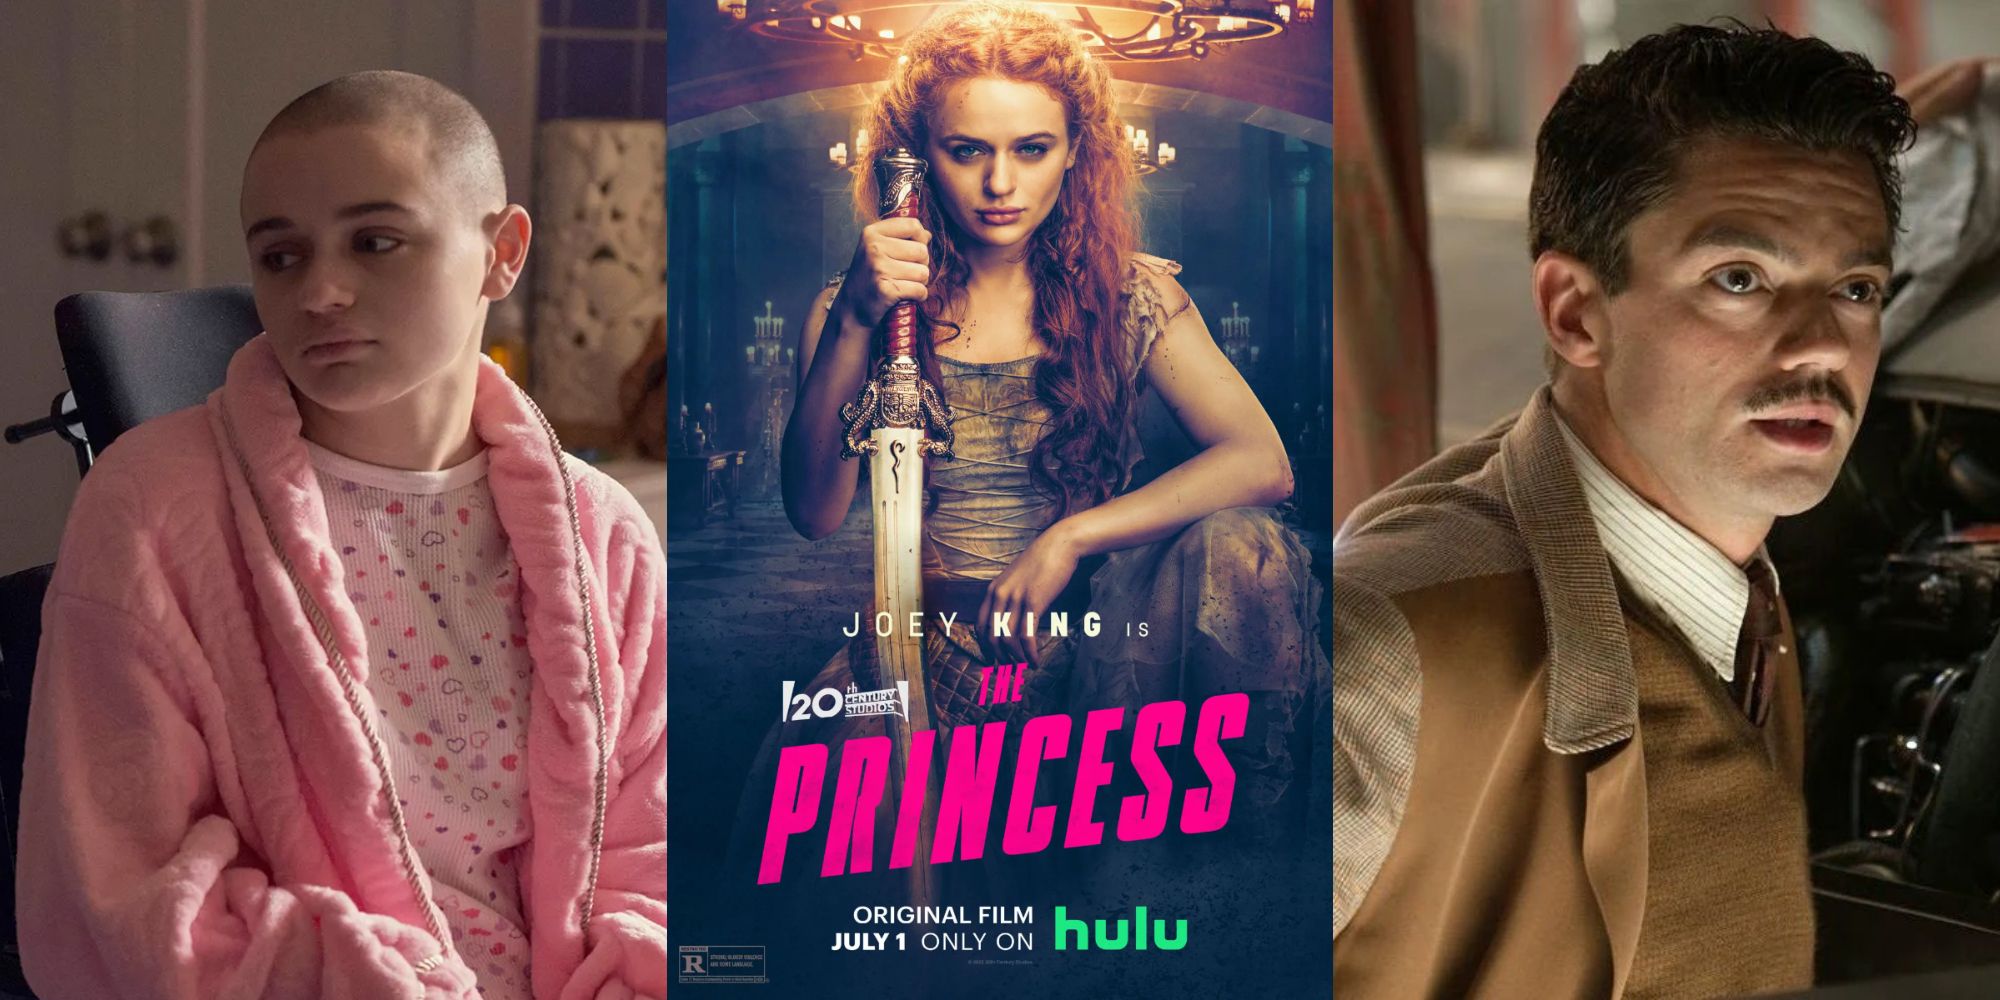 Joey King in The Act, a poster for Hulu's The Princess, and Dominic Cooper as Howard Stark